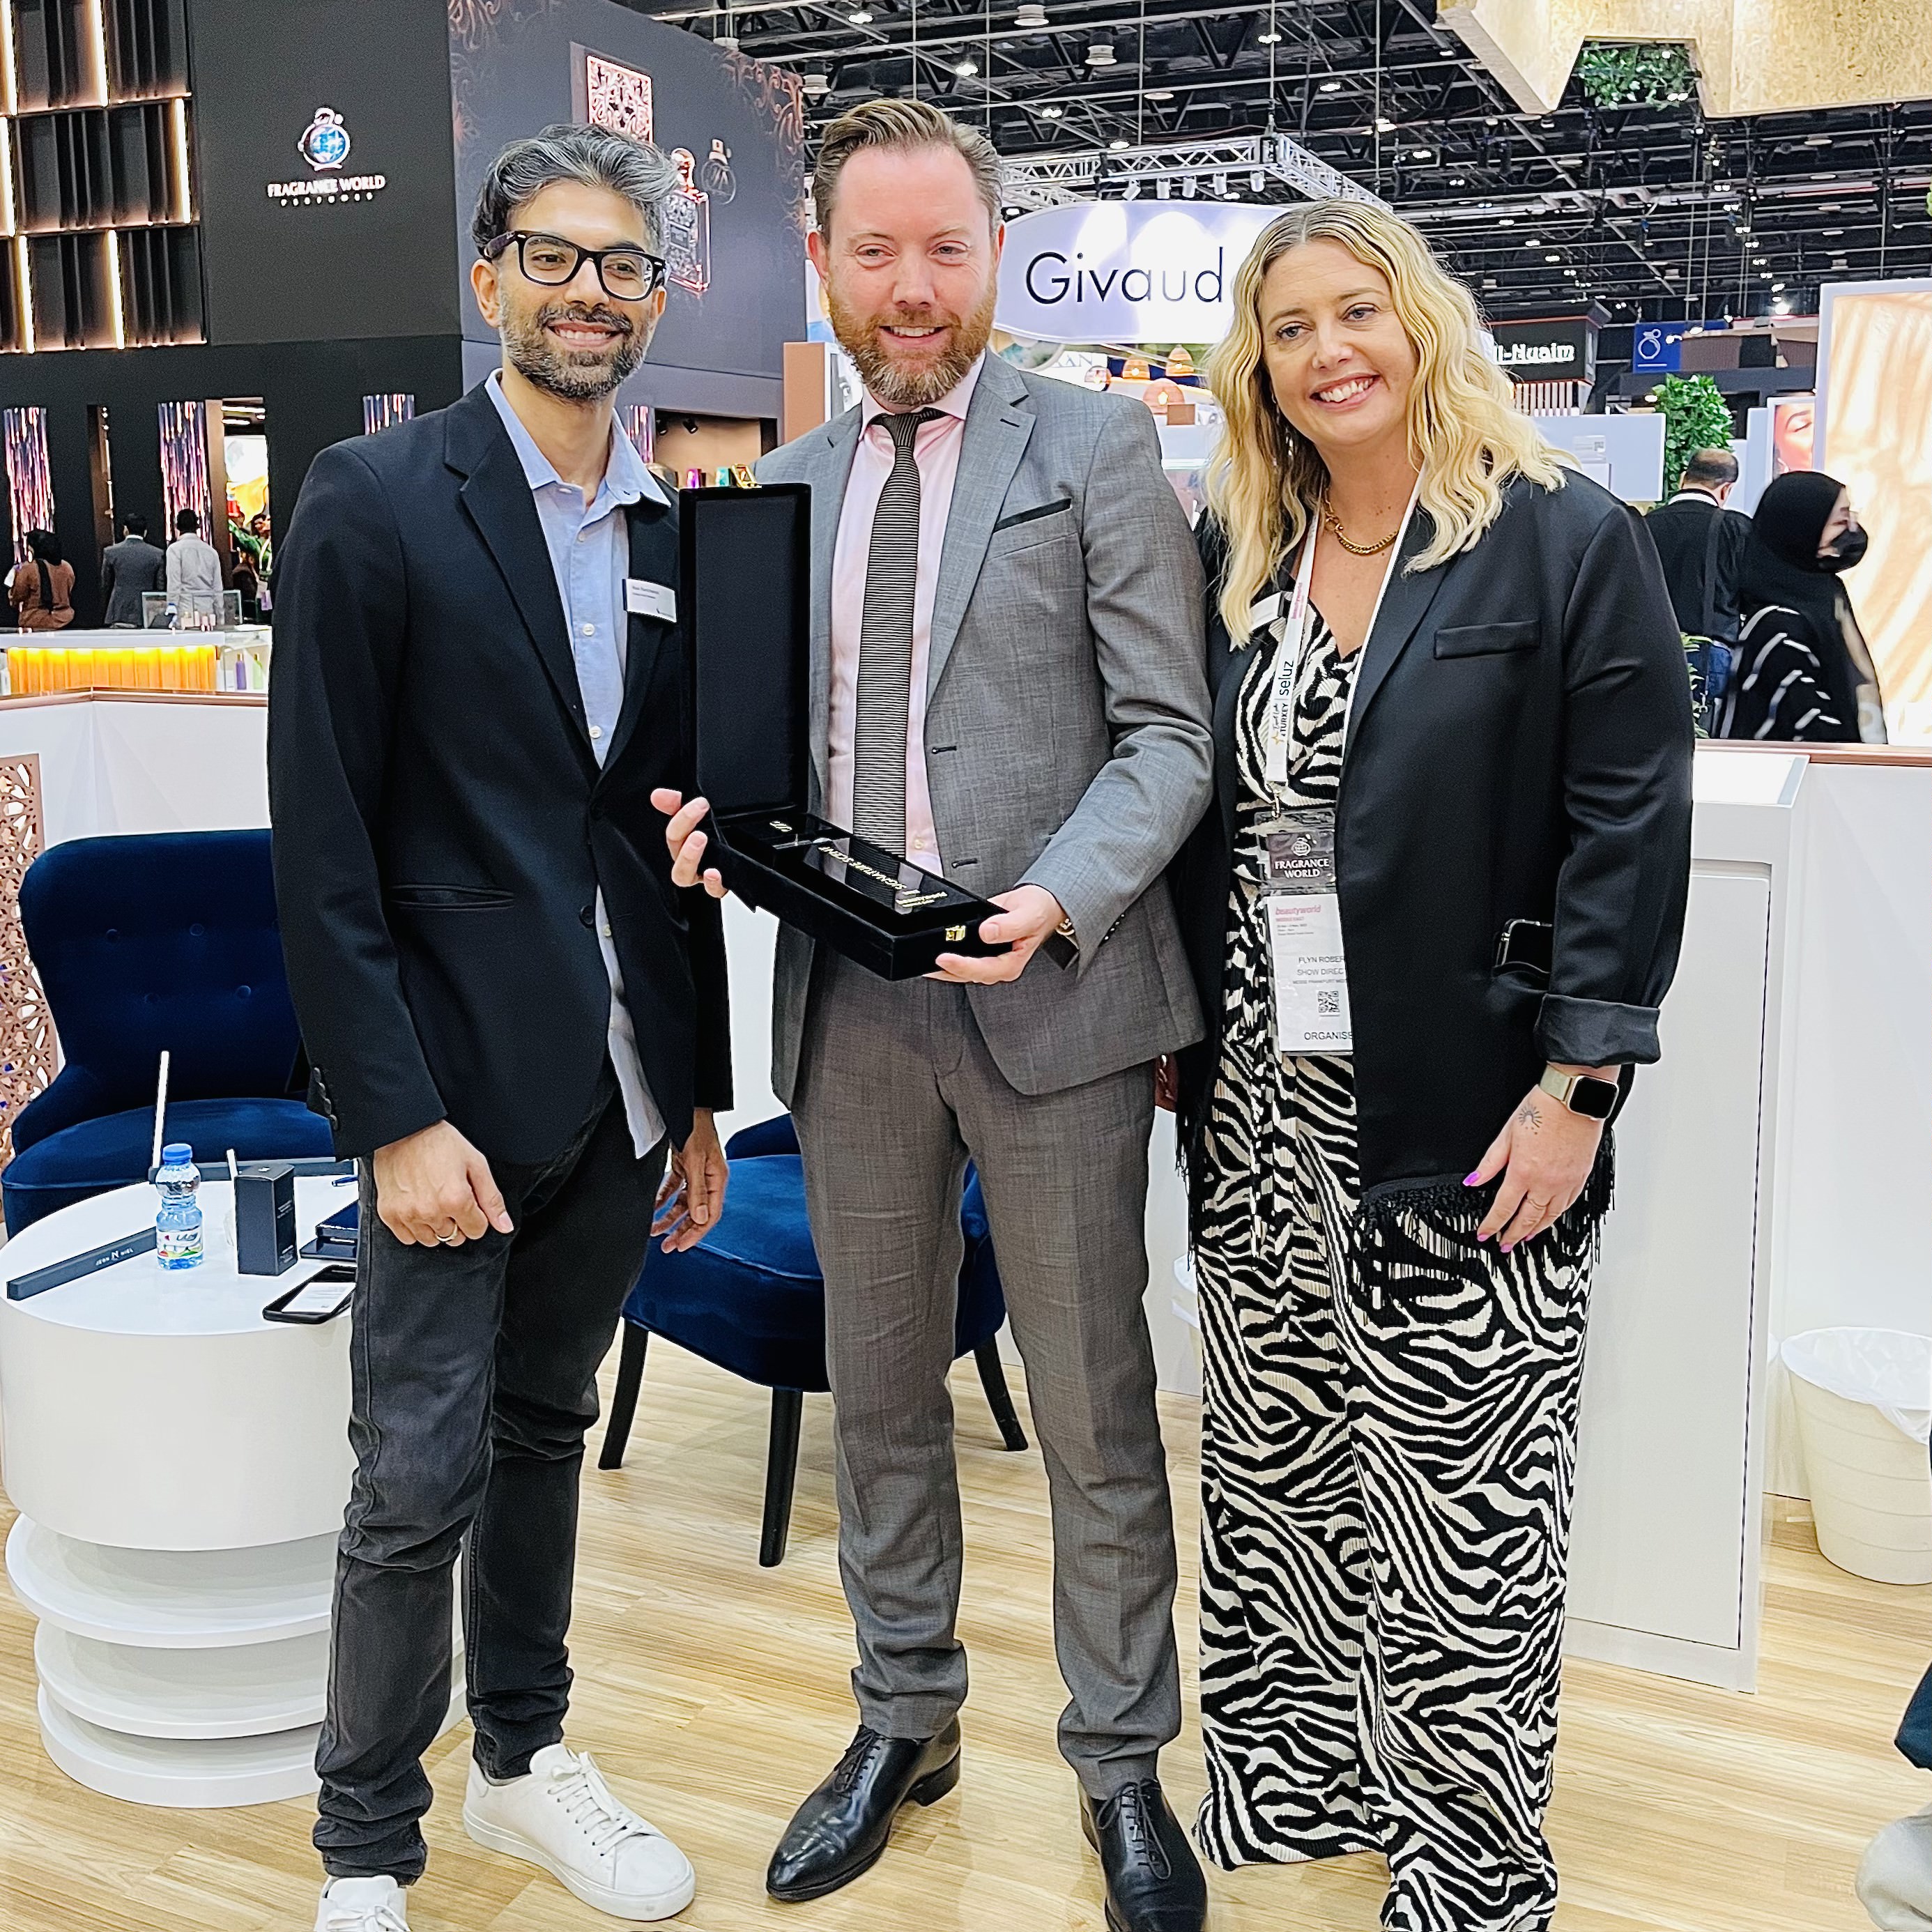 Beautyworld Middle East - Innovation takes Centre Stage as 26th edition of Beautyworld Middle East comes to a close in Dubai